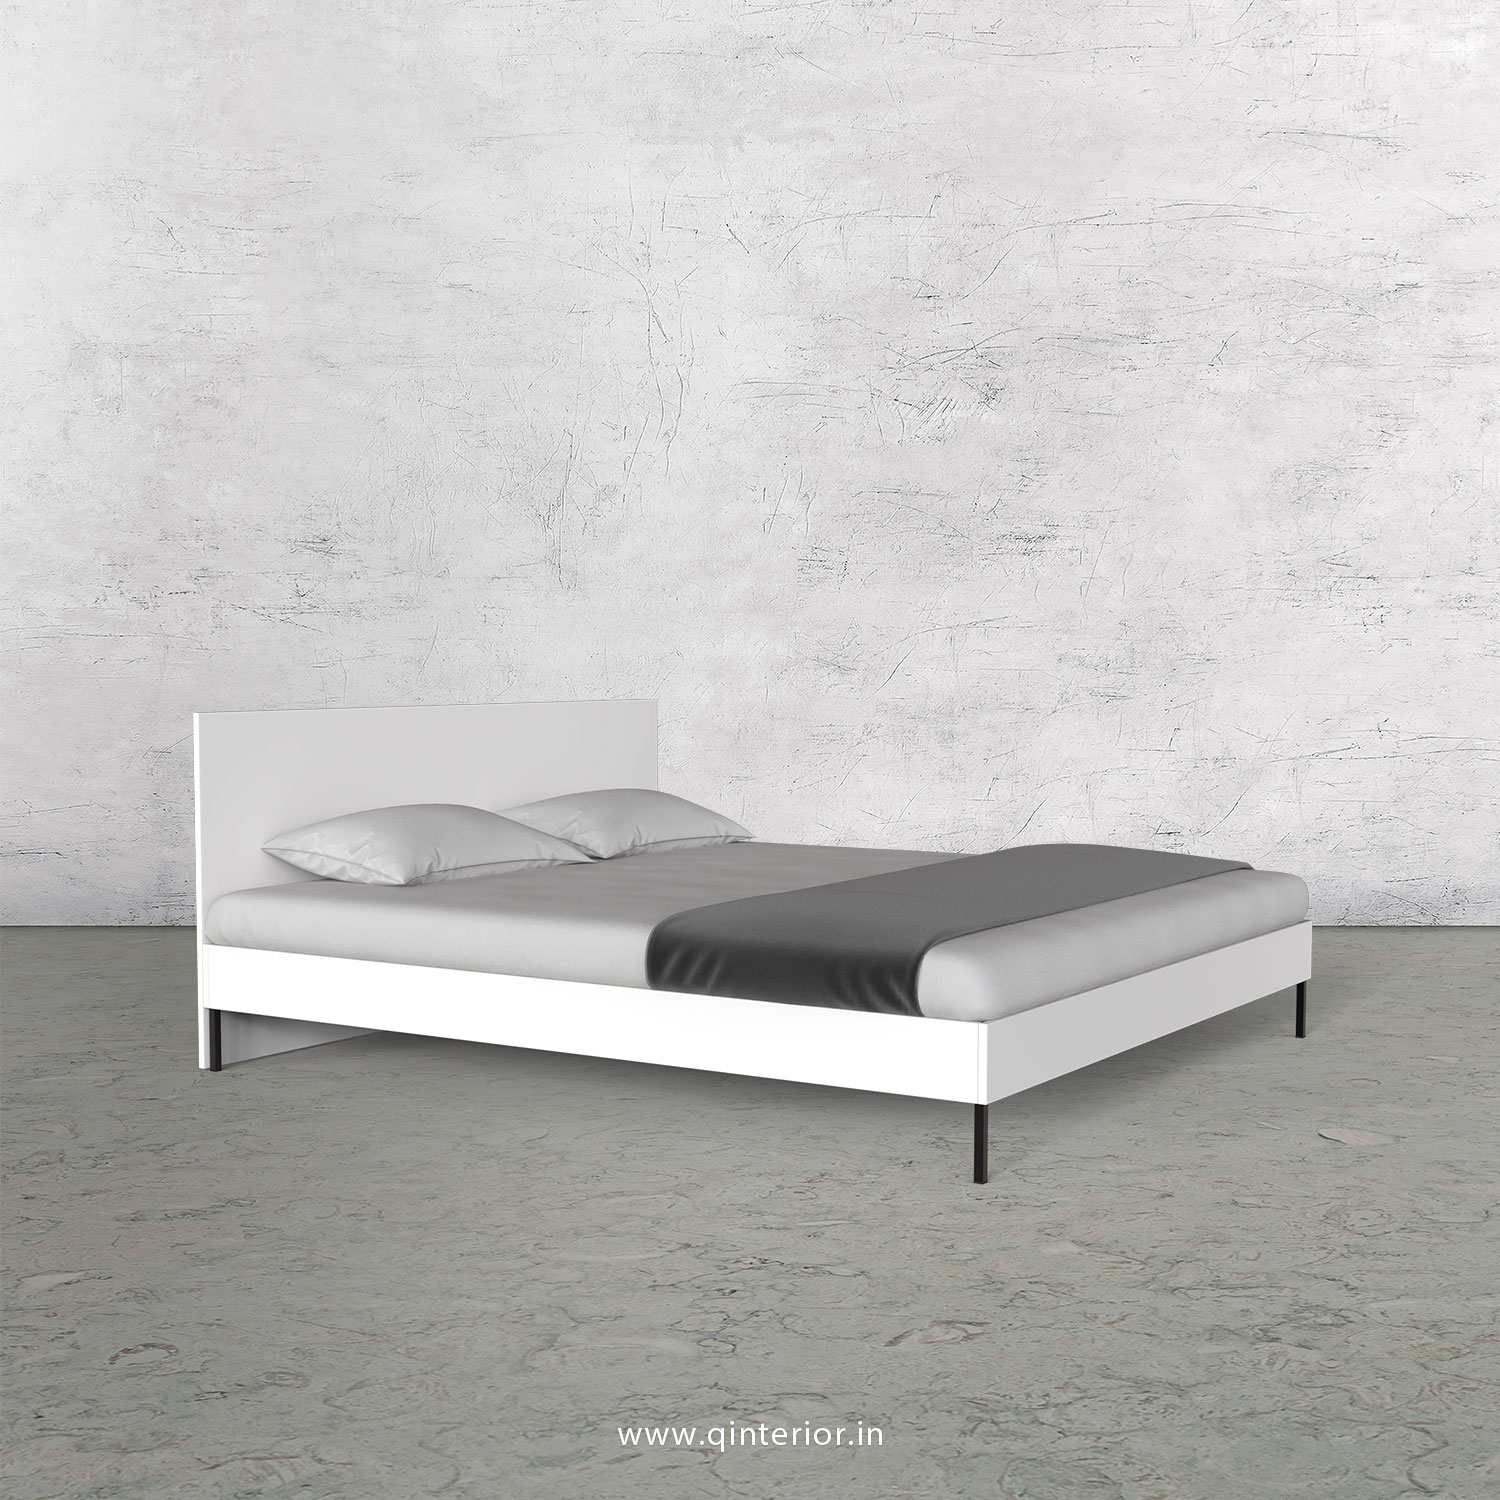 Stable King Size Bed in White Finish - KBD105 C4